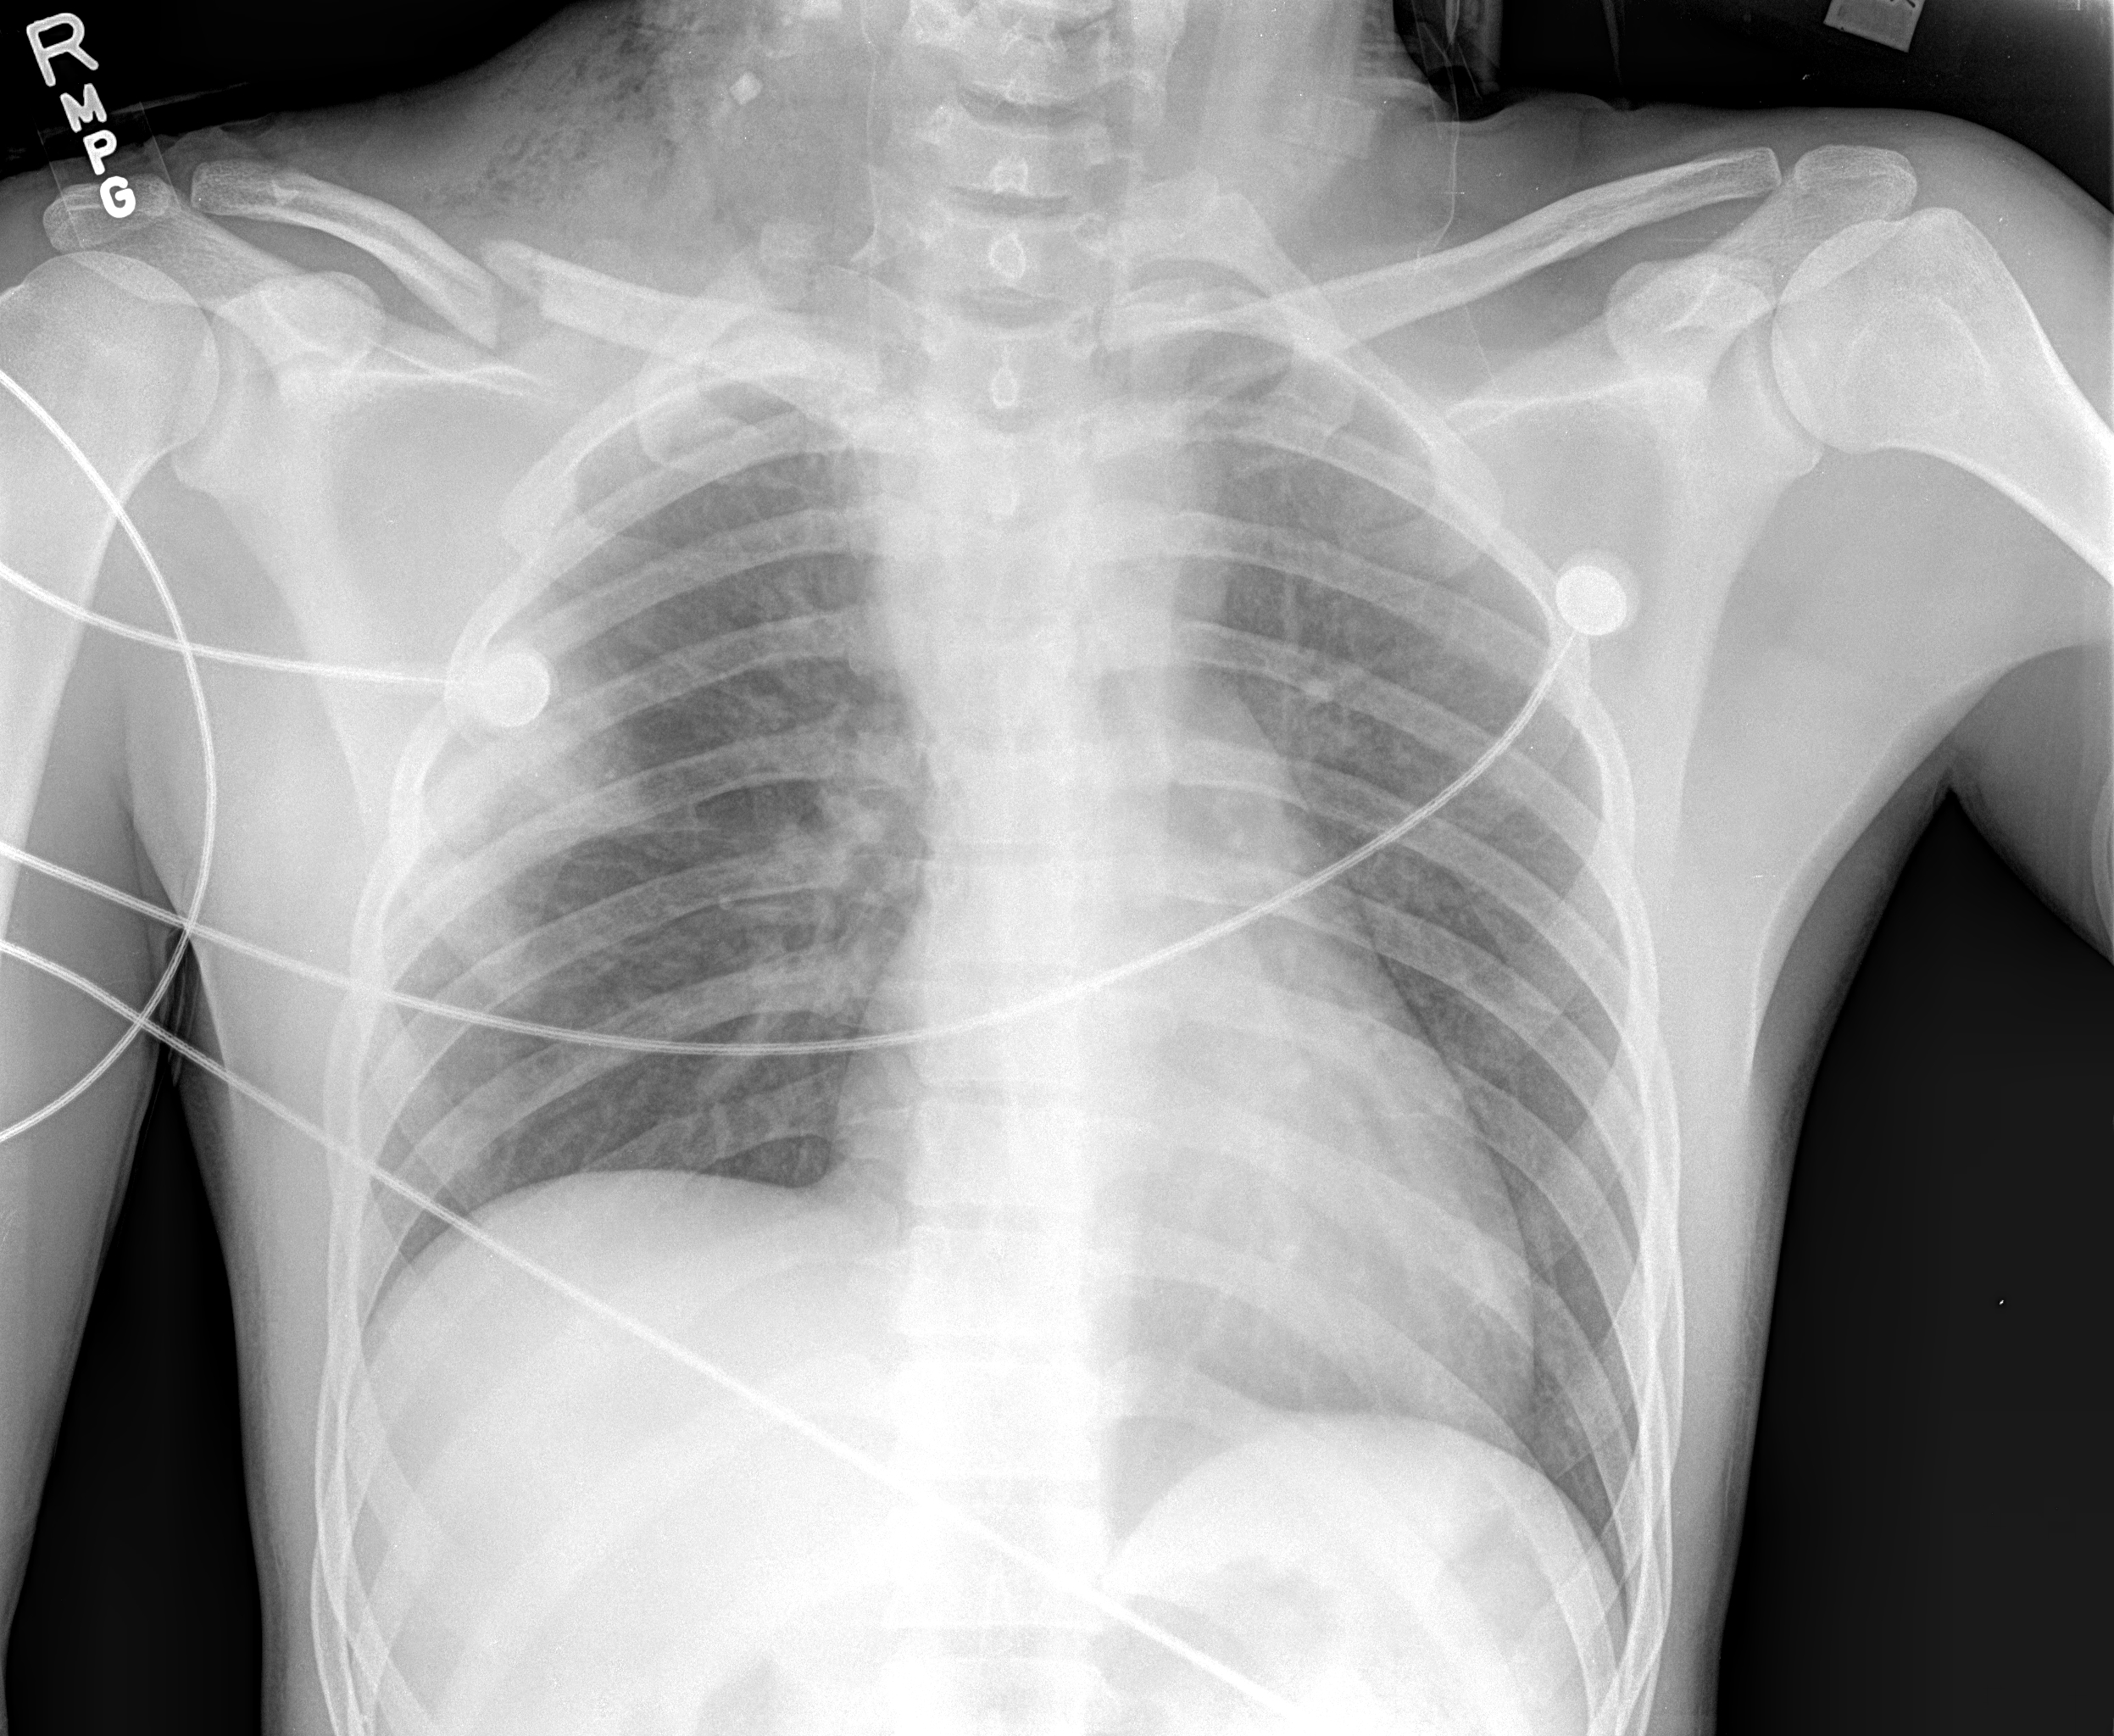 Chest x-ray of a patient who sustained traumatic root avulsion brachial plexus injury